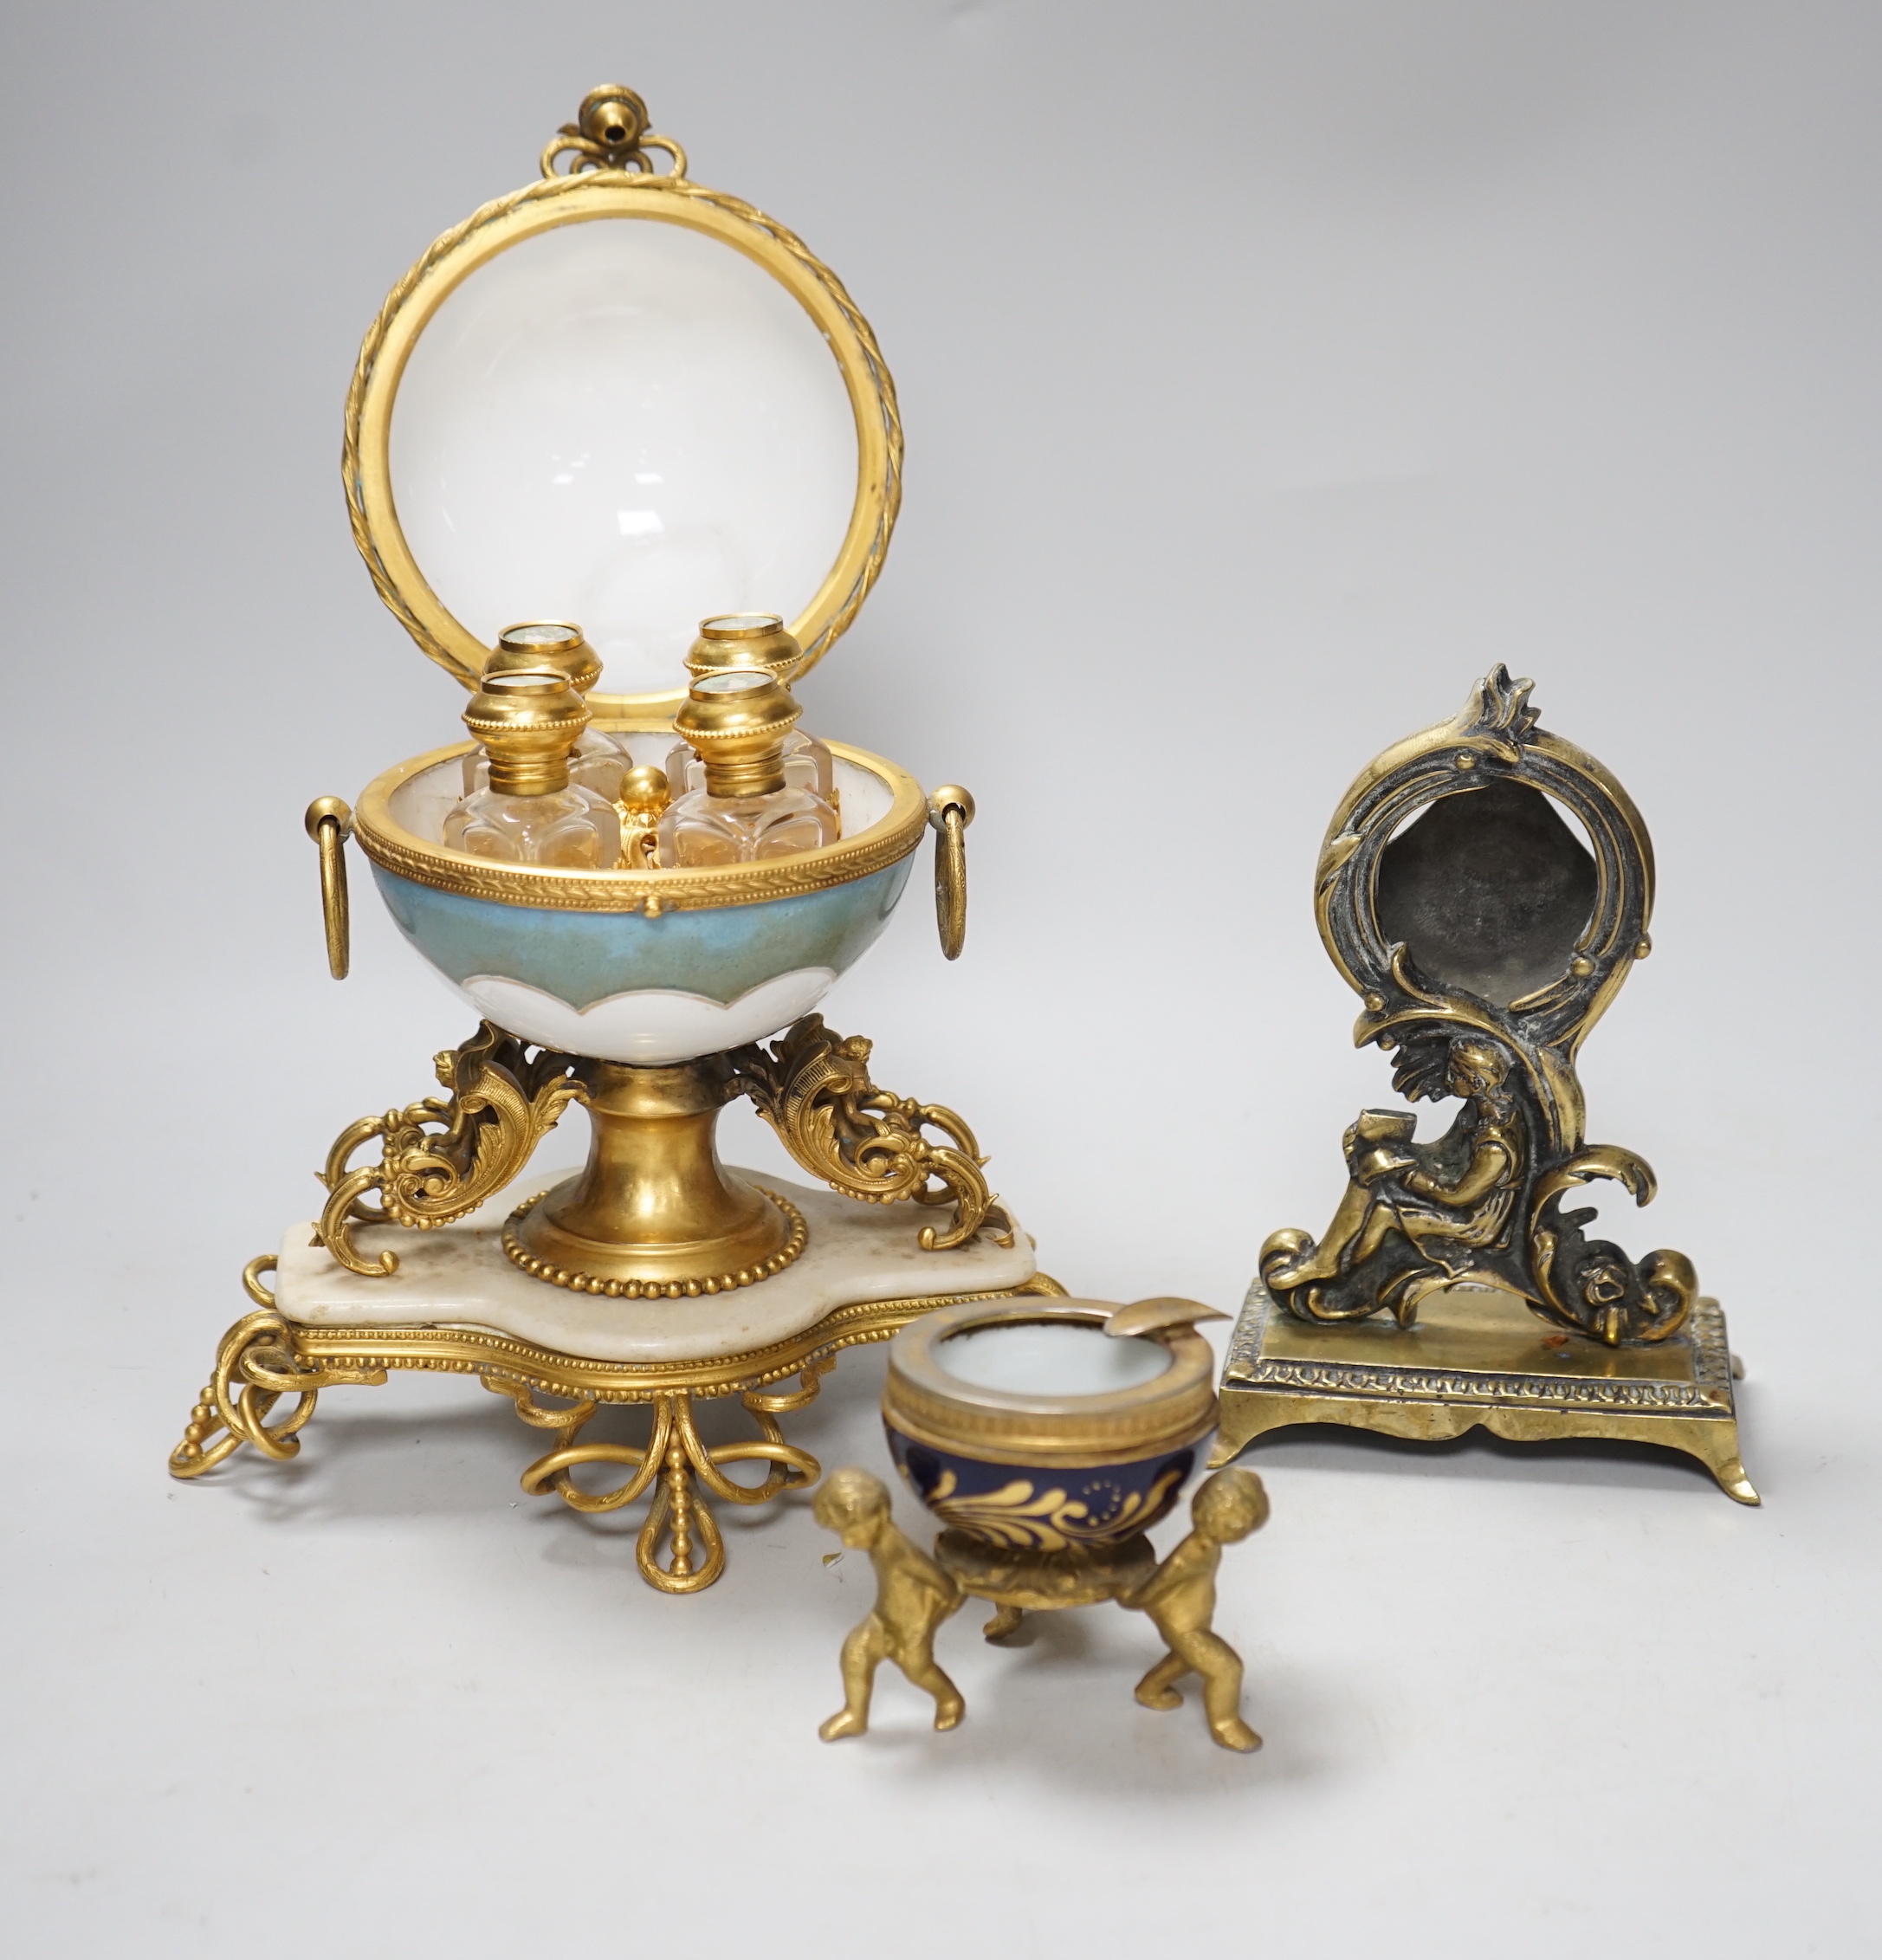 A 19th century French globular scent bottle casket together with a similar ash tray and a watch